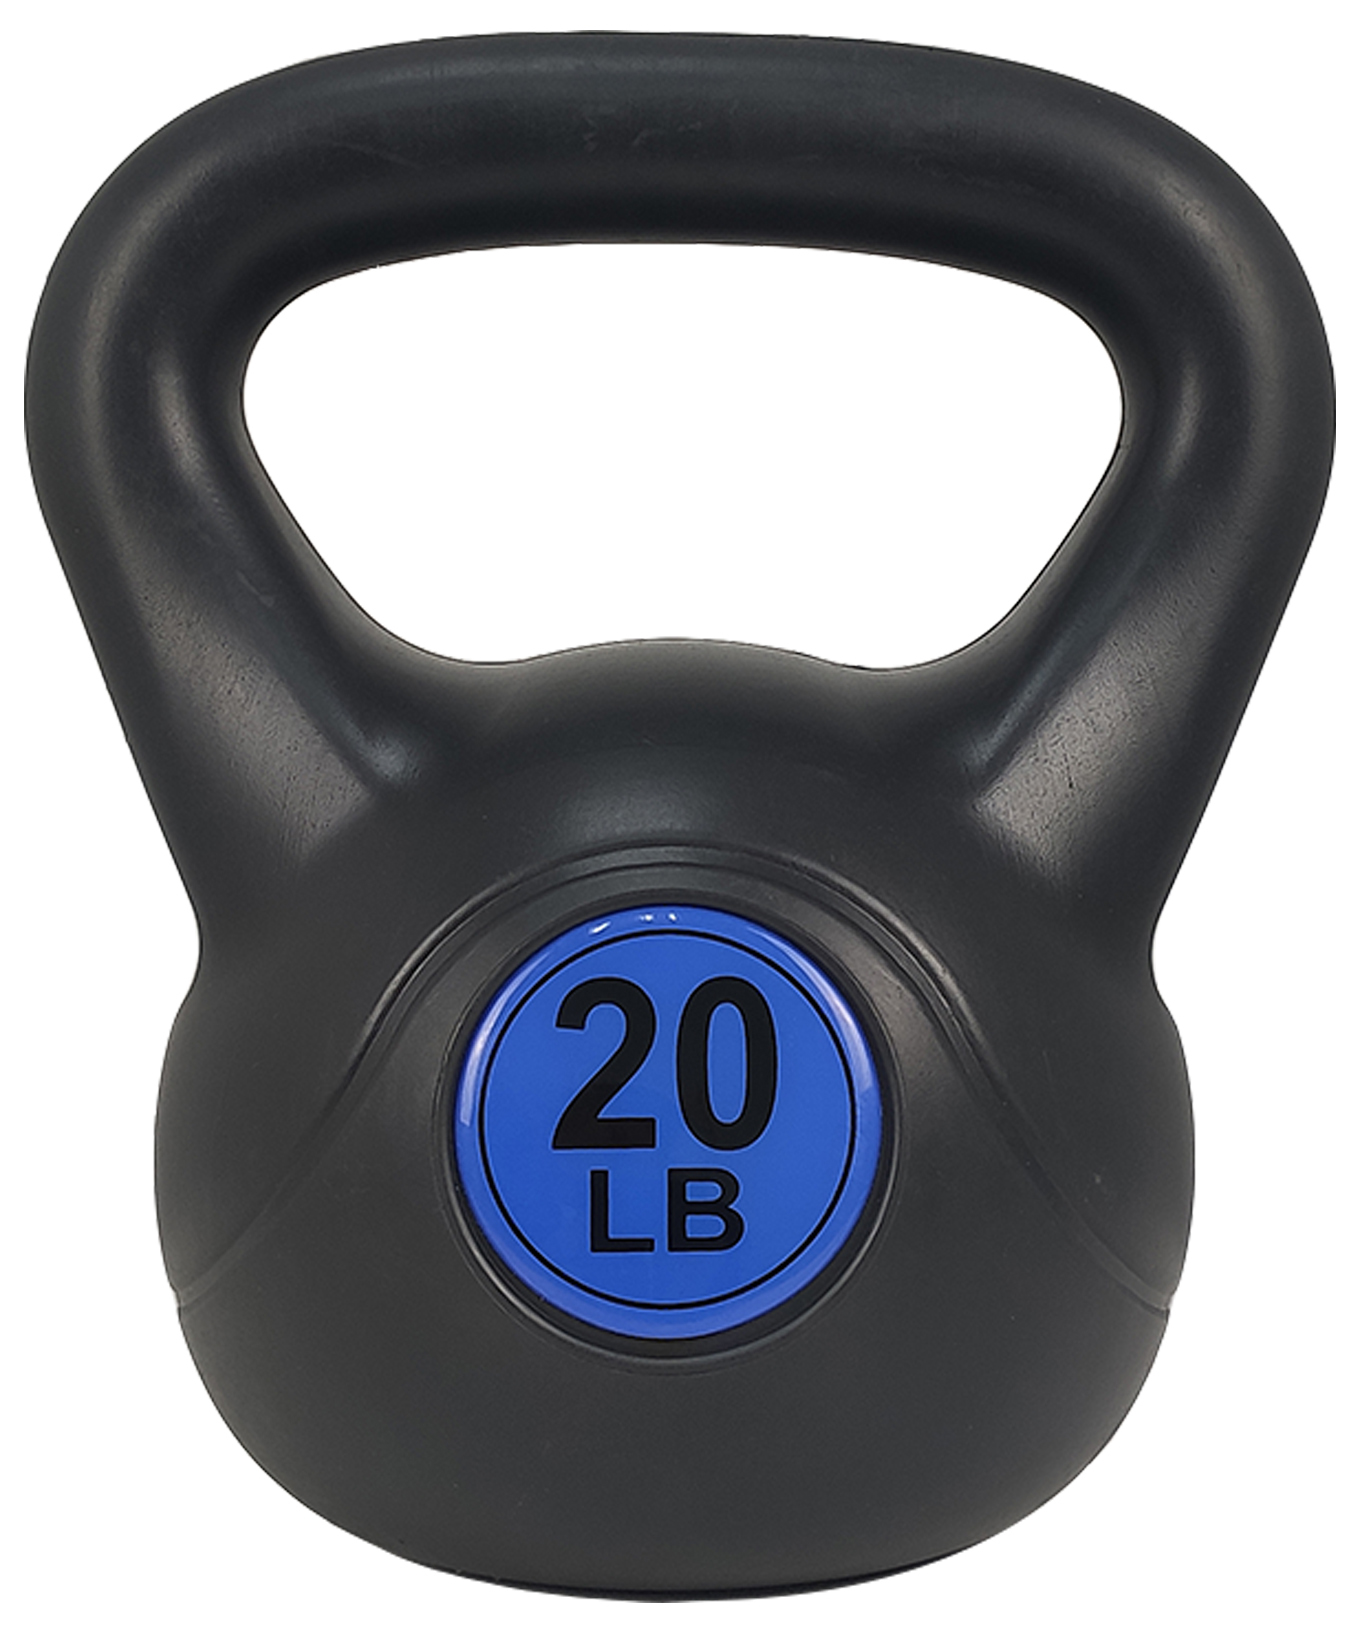 BalanceFrom Wide Grip Kettlebell Exercise Fitness Weight Set, 3-Pieces: 10lb, 15lb and 20lb Kettlebells - image 4 of 6